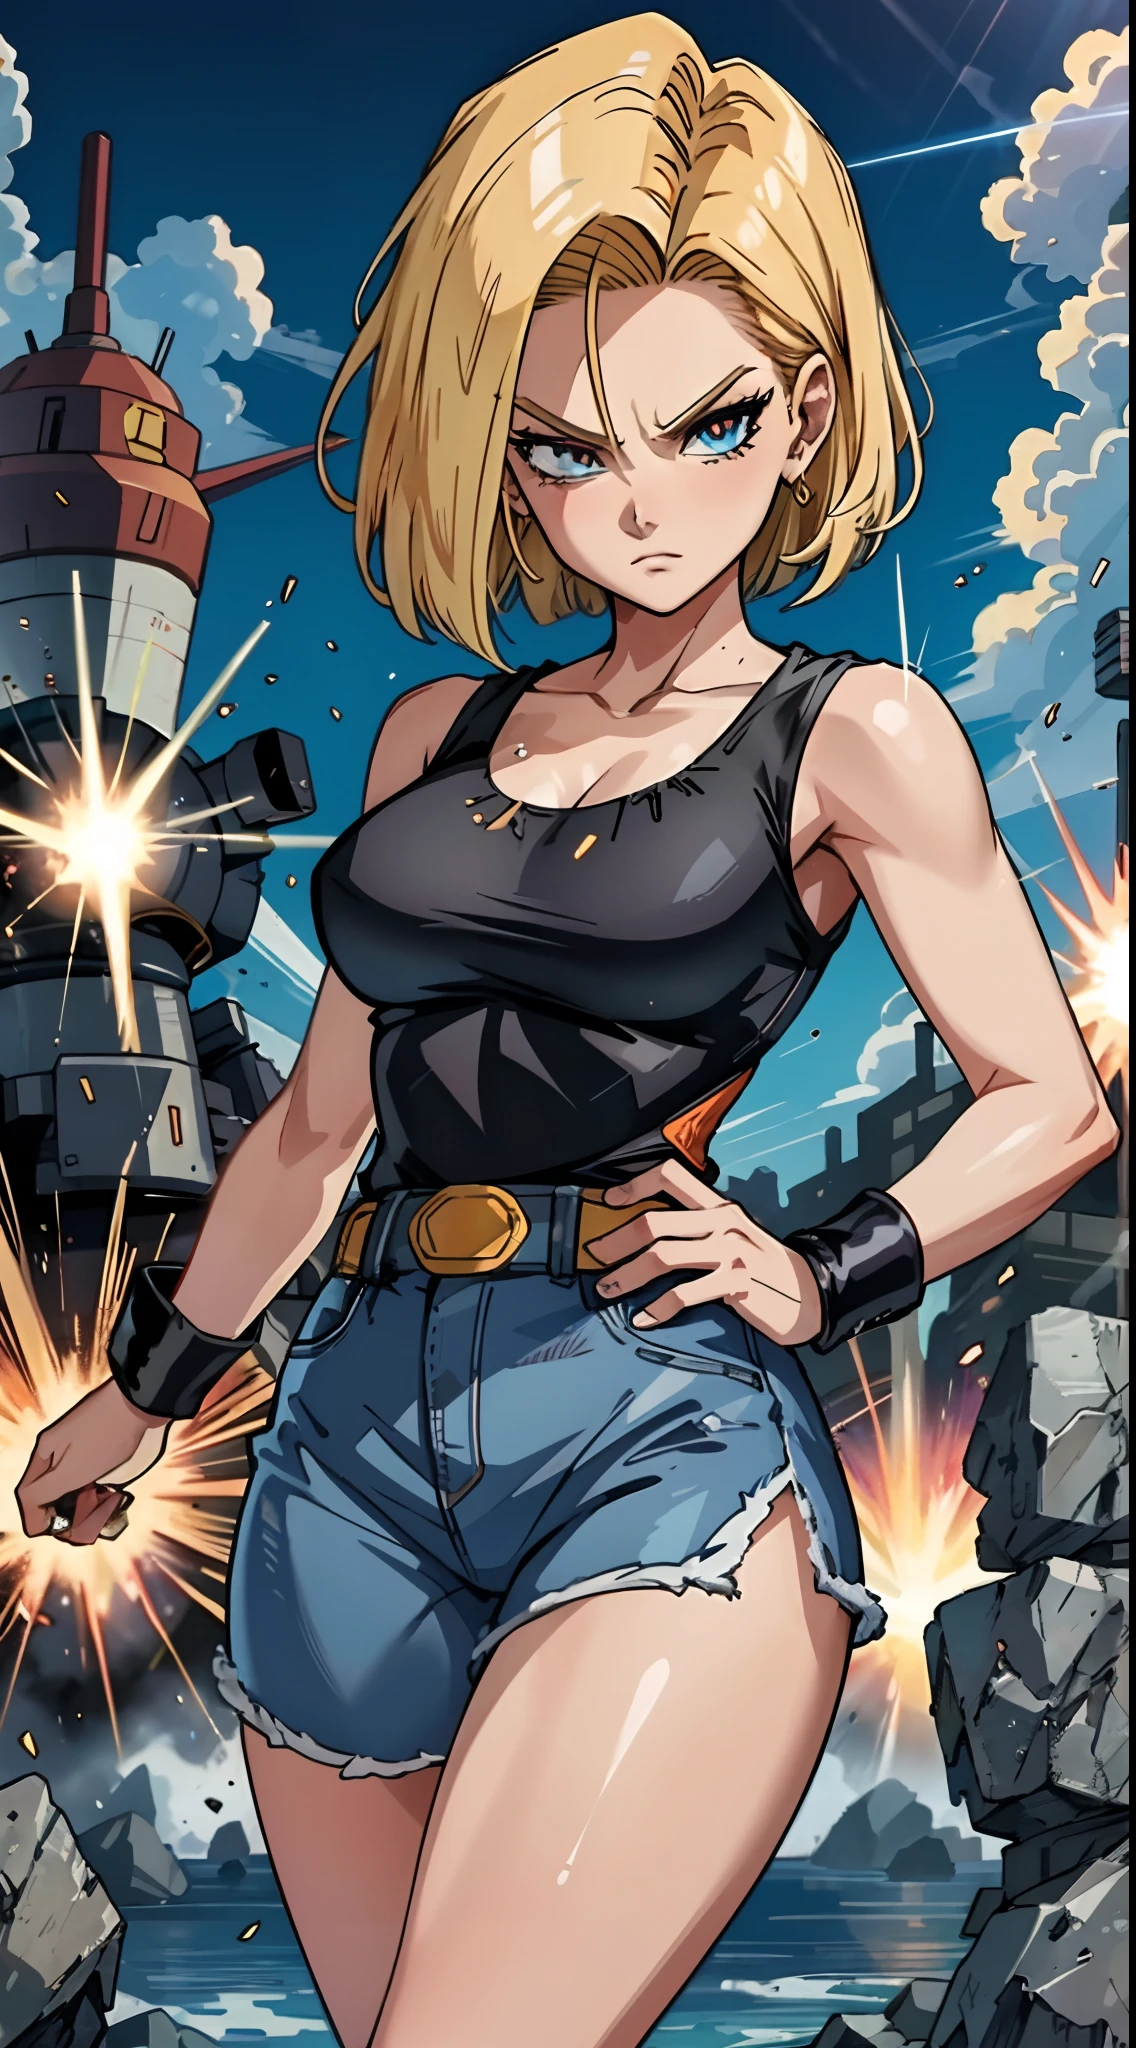 "Android 18 unleashes her immense power, Produce awesome, Destructive energy explosion."